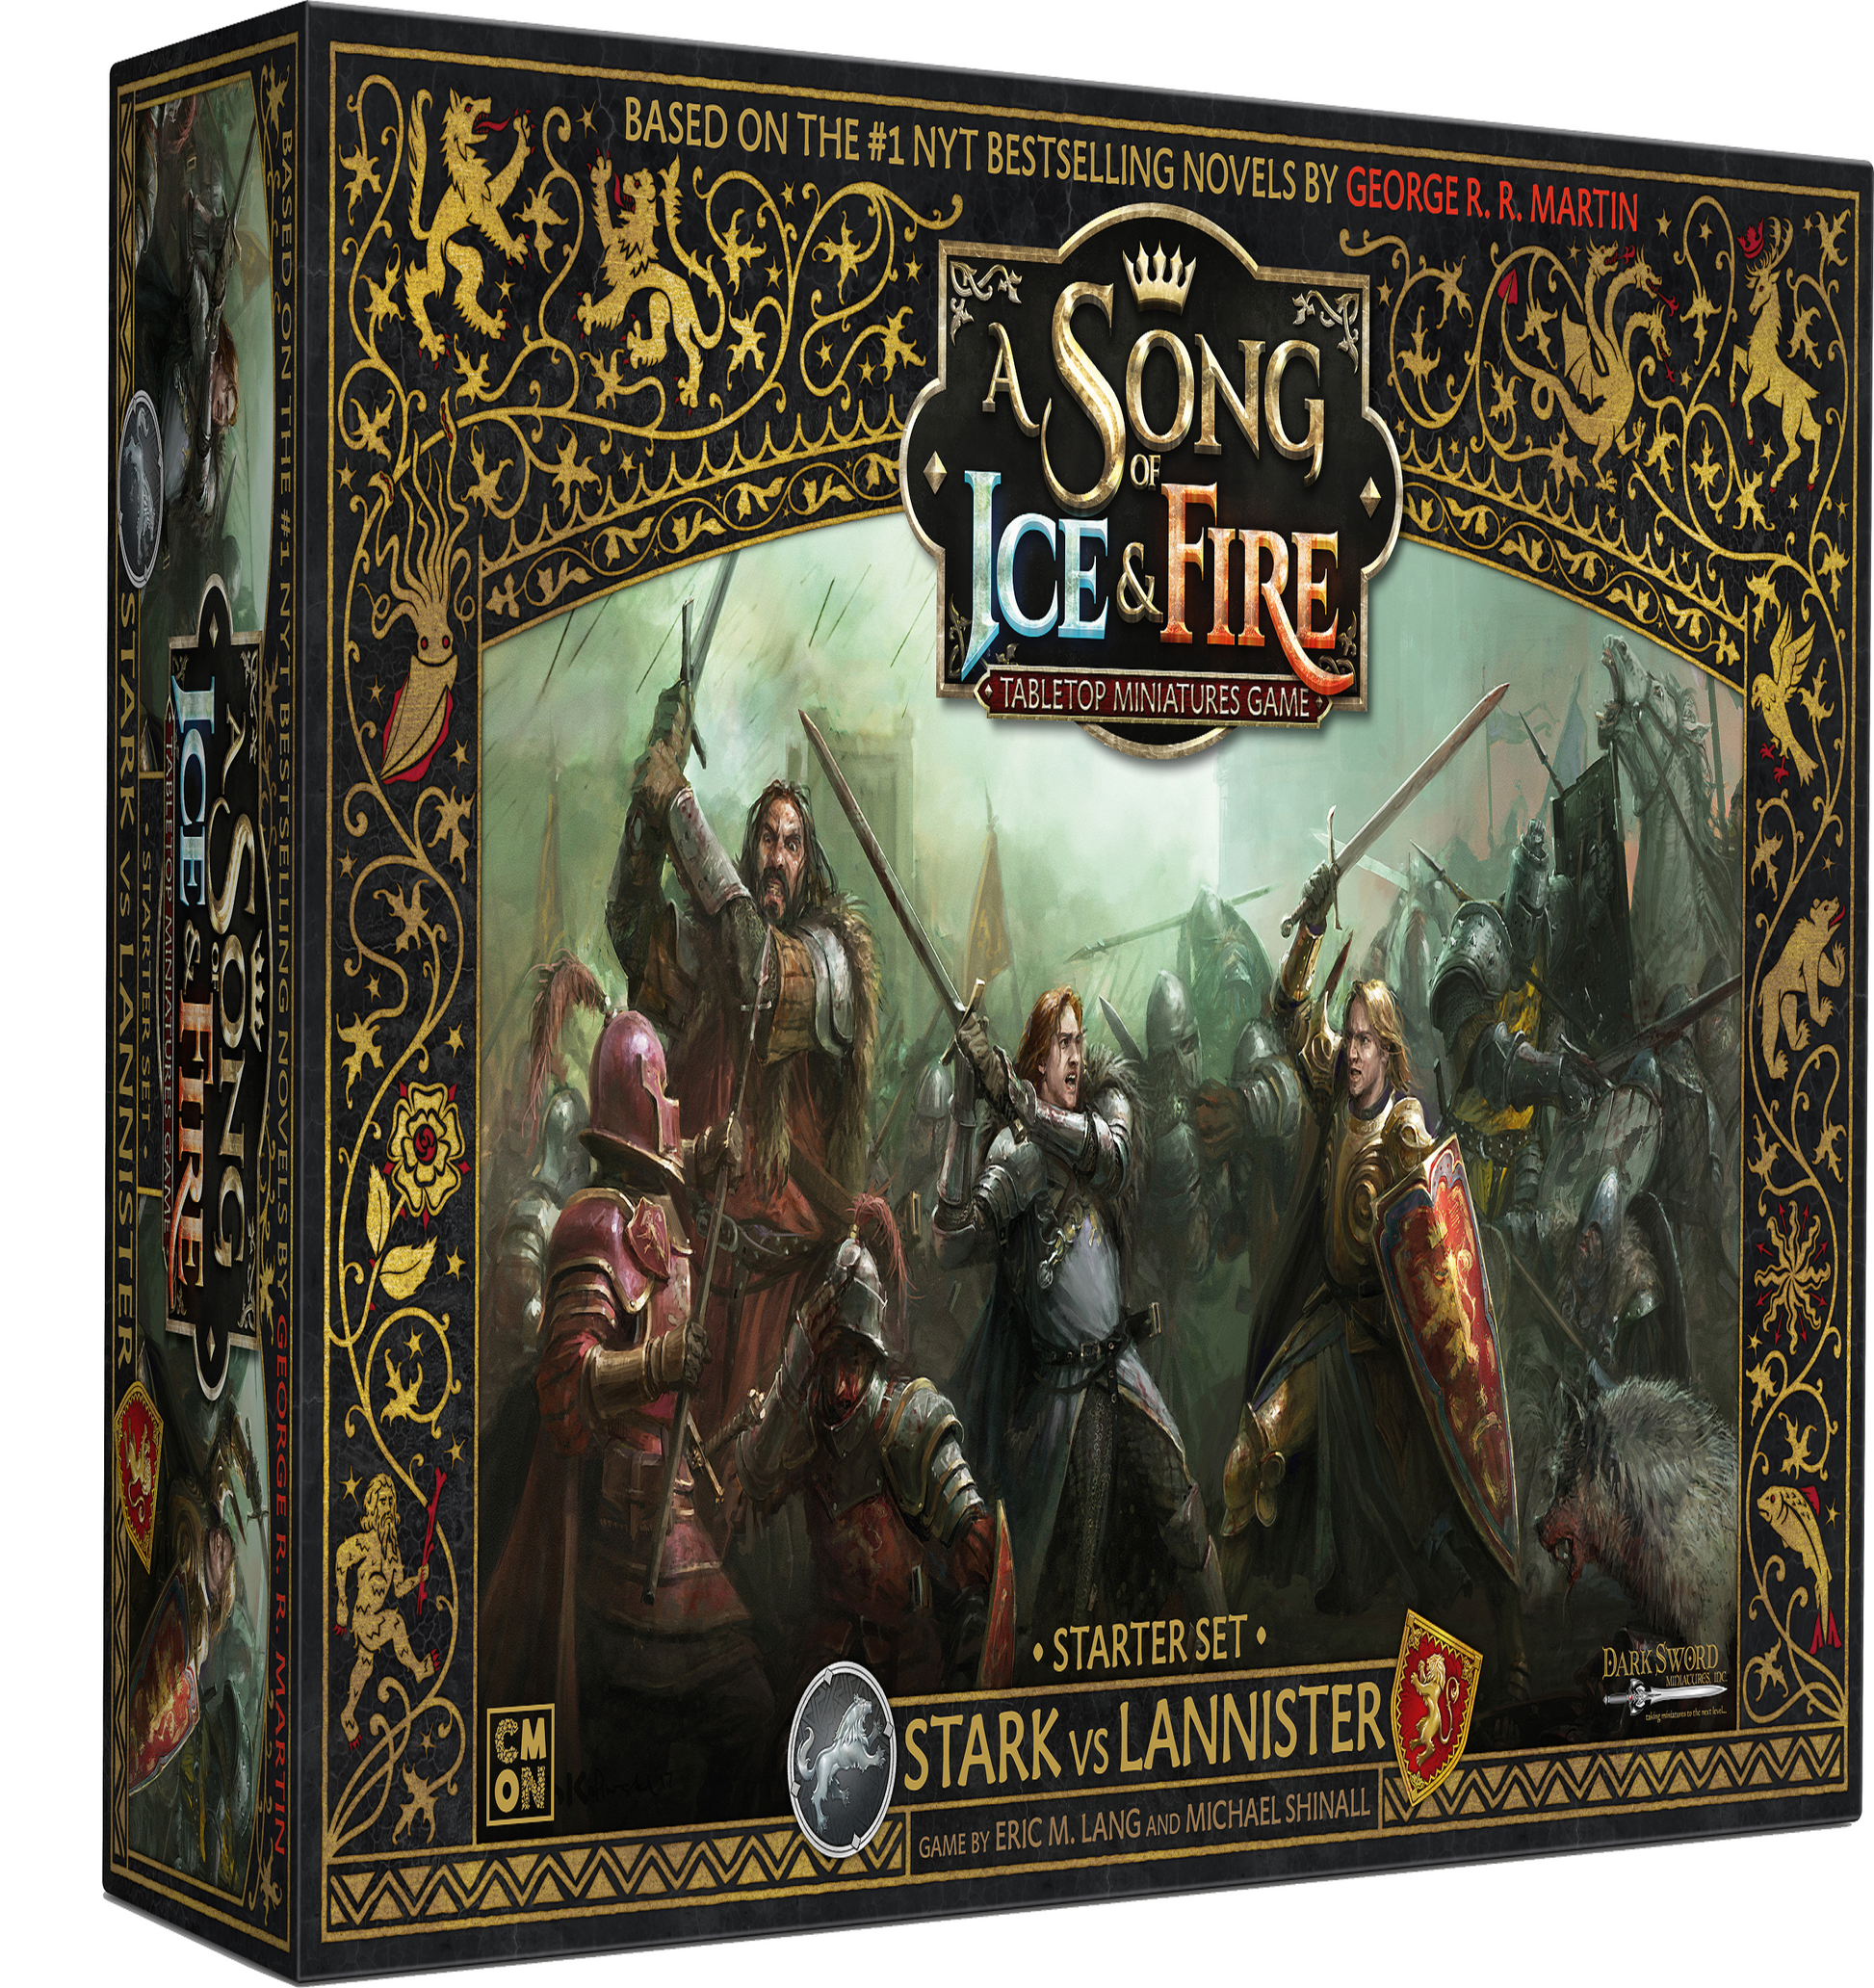 Stark vs Lannister Starter set A Song Of Ice and Fire Core Box